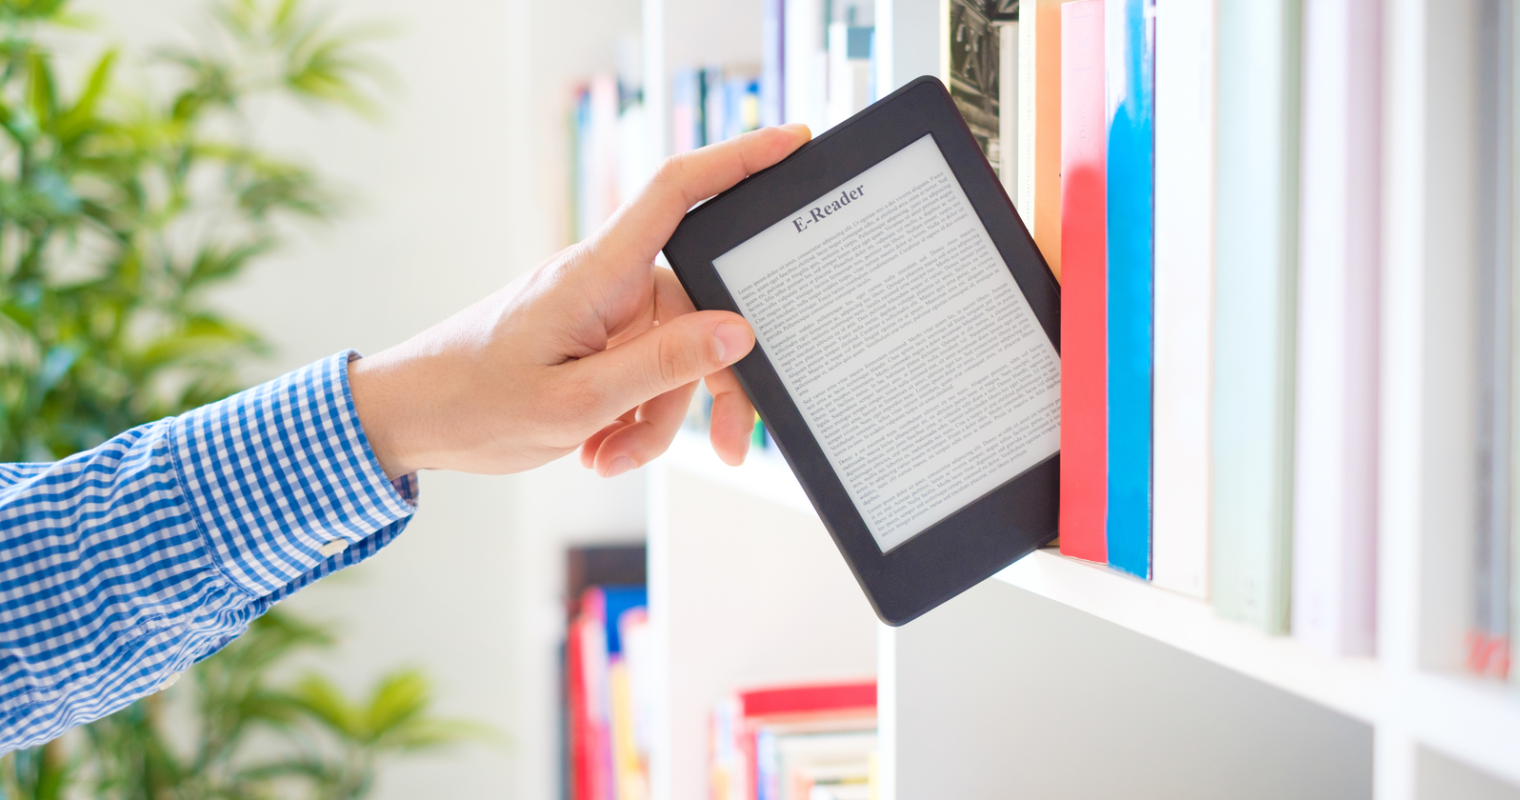 Top 7 Ideas for an Ebook to Promote your Business